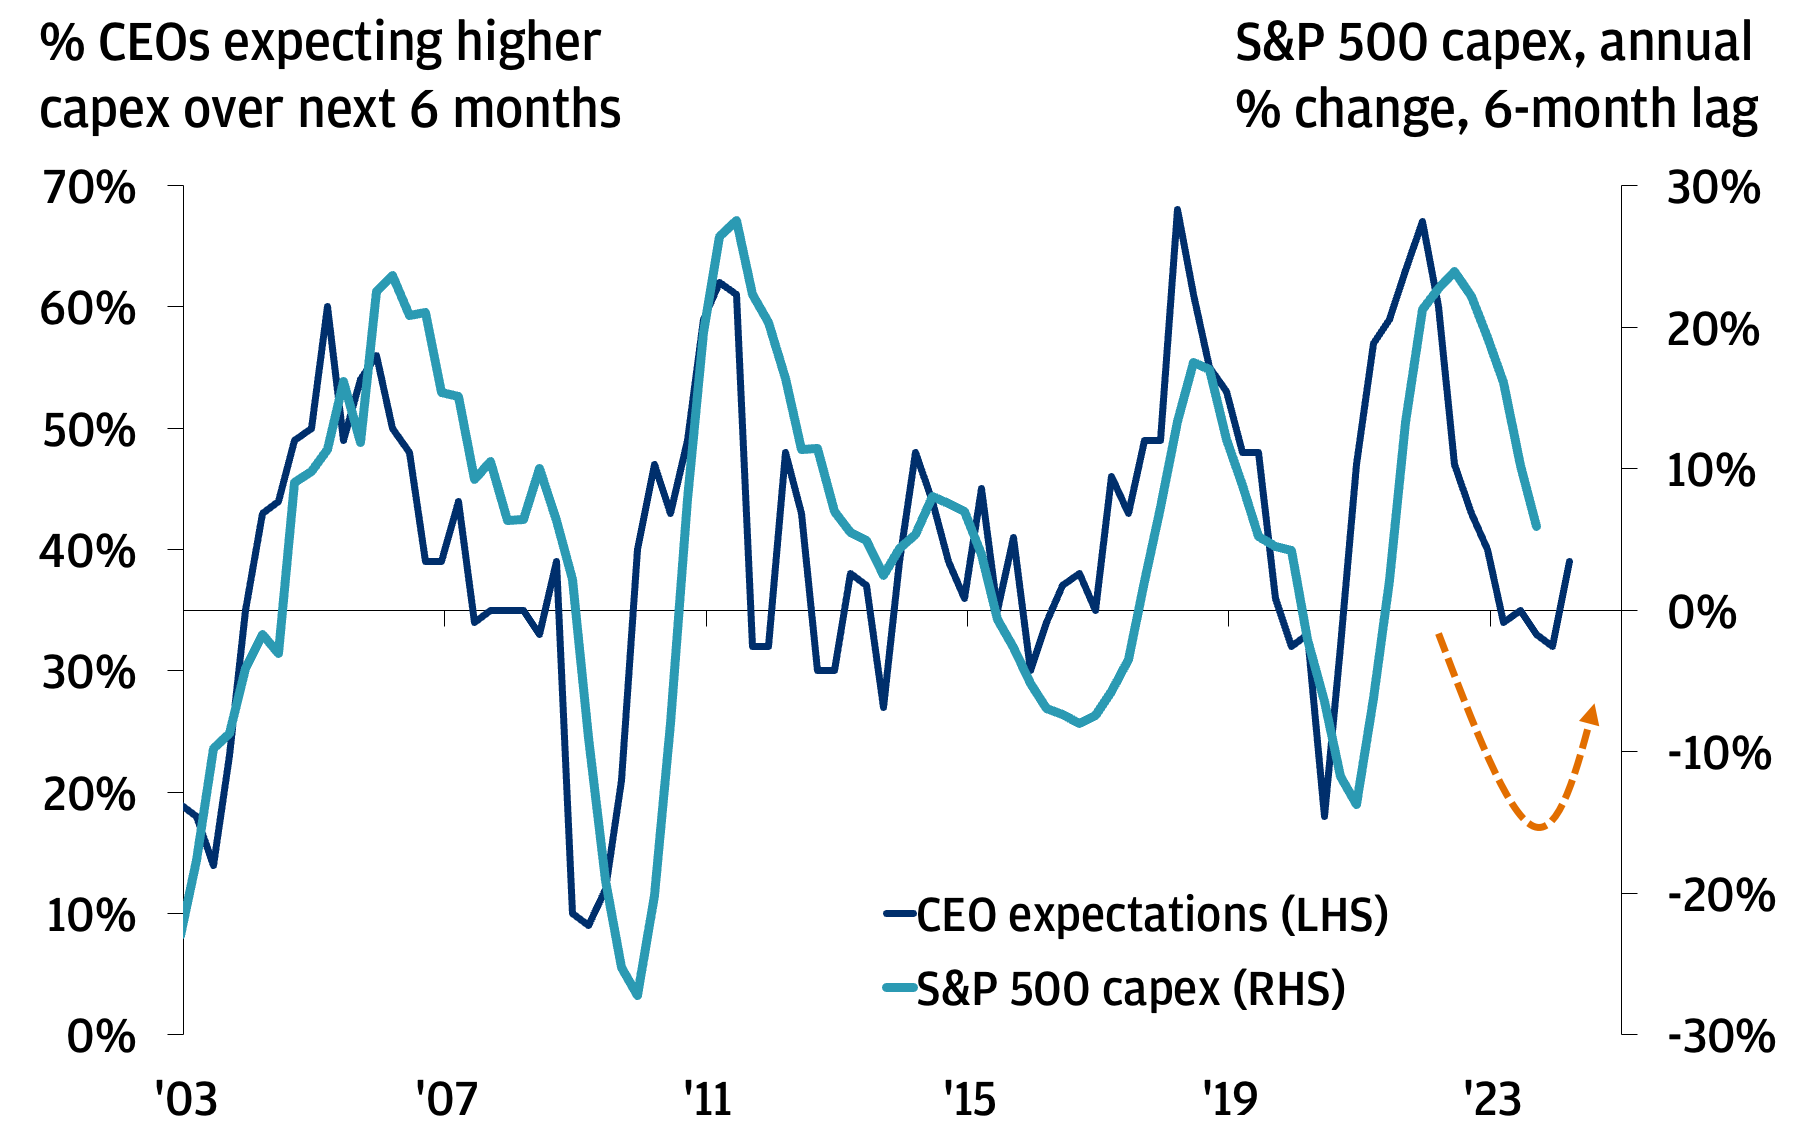 This chart shows the percentage of U.S. CEOs expecting higher capex (capital expenditures) over the next six months and S&P 500 capex growth, calculated as the year-over-year change in trailing 12 months S&P 500 capital expenditures.